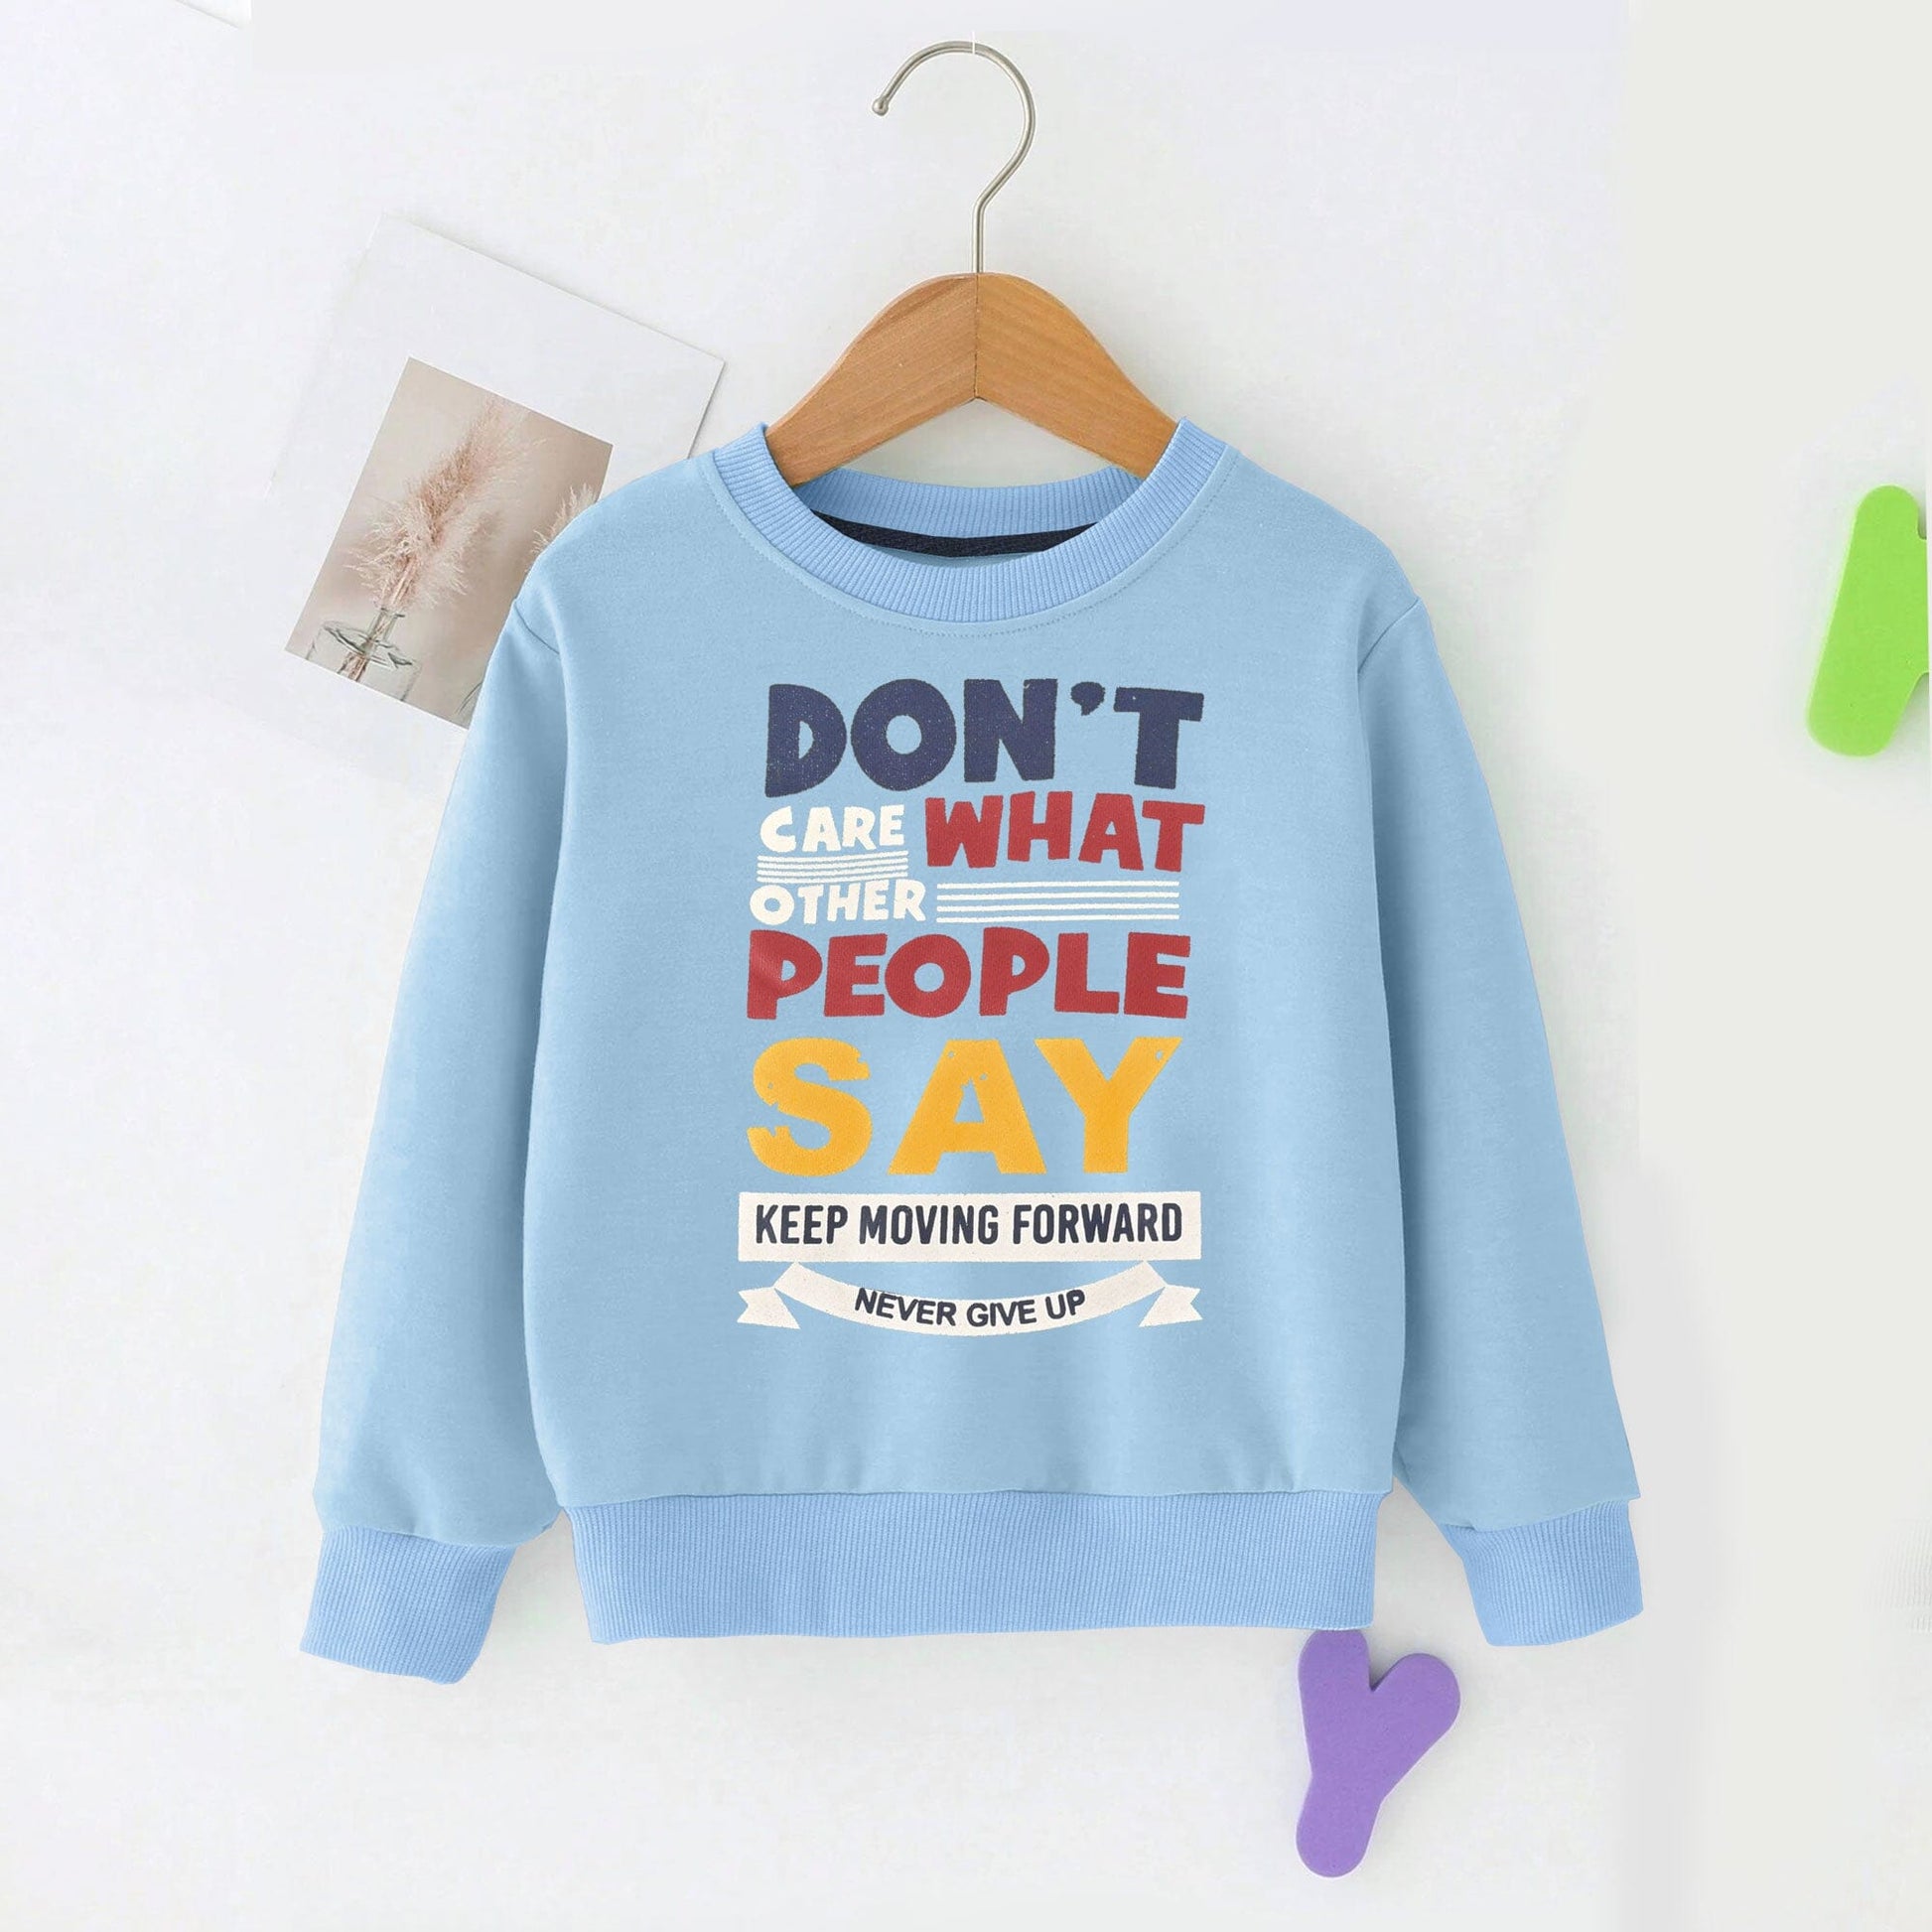 Kid's Don't Care What People Say Printed Fleece Sweat Shirt Kid's Sweat Shirt SNR Powder Blue 9-12 Months 